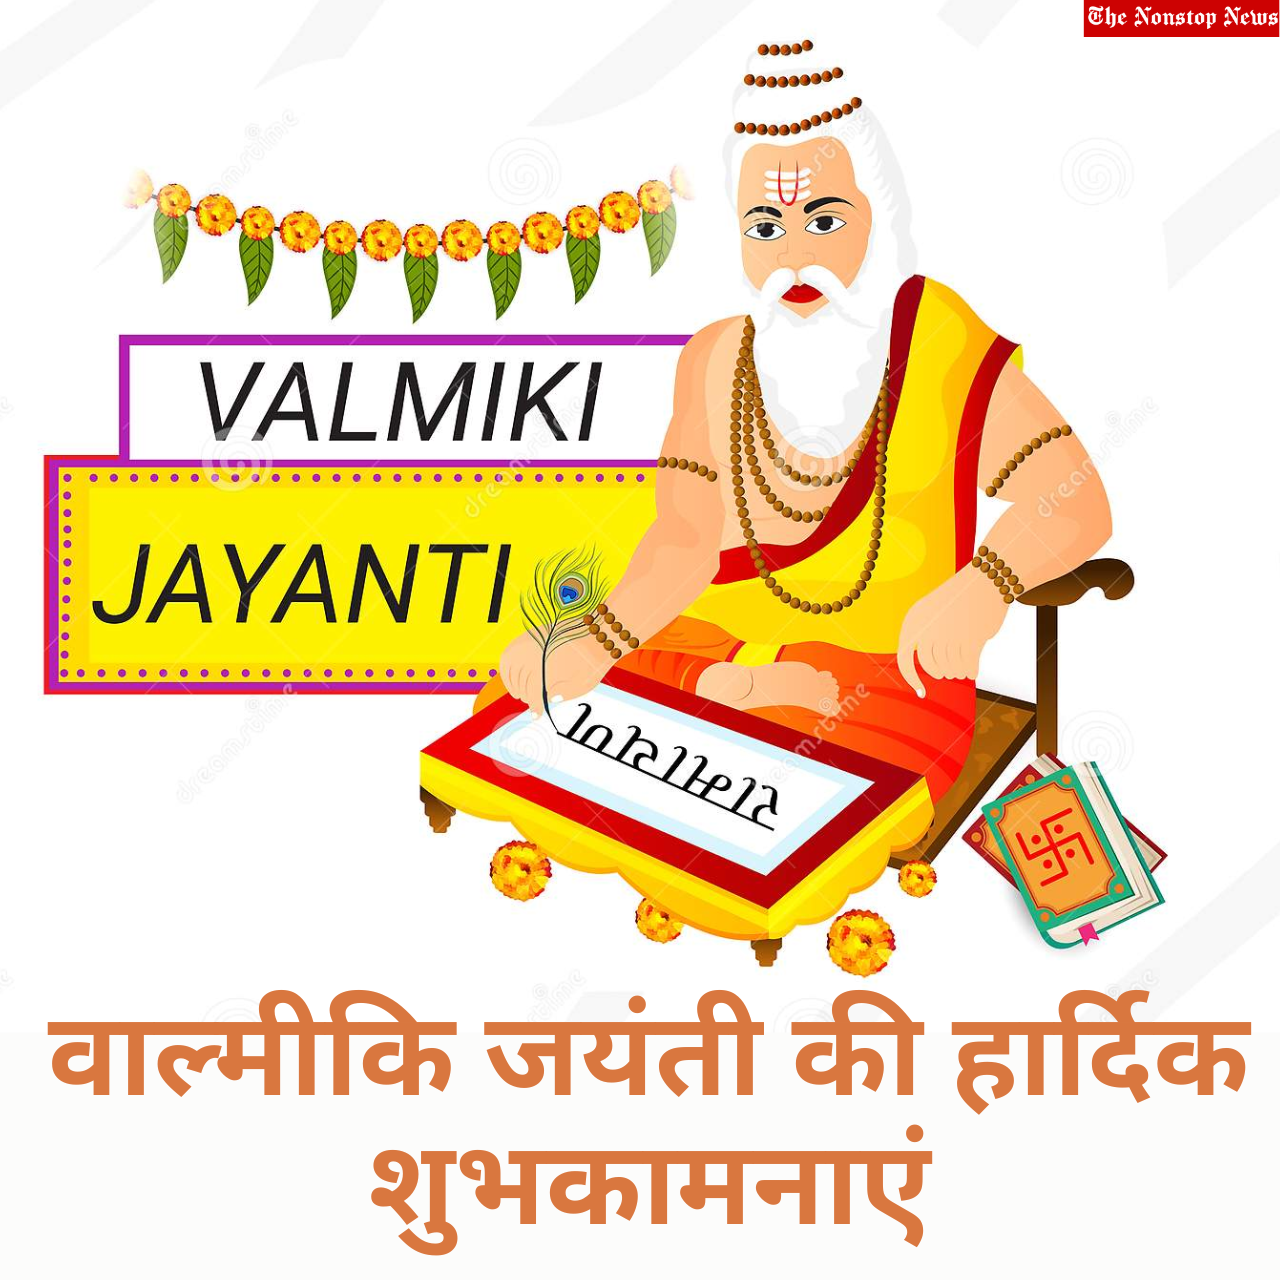 Valmiki Jayanti 2022 Images in Hindi: Greetings, Wishes, Quotes, Shayari, and Messages